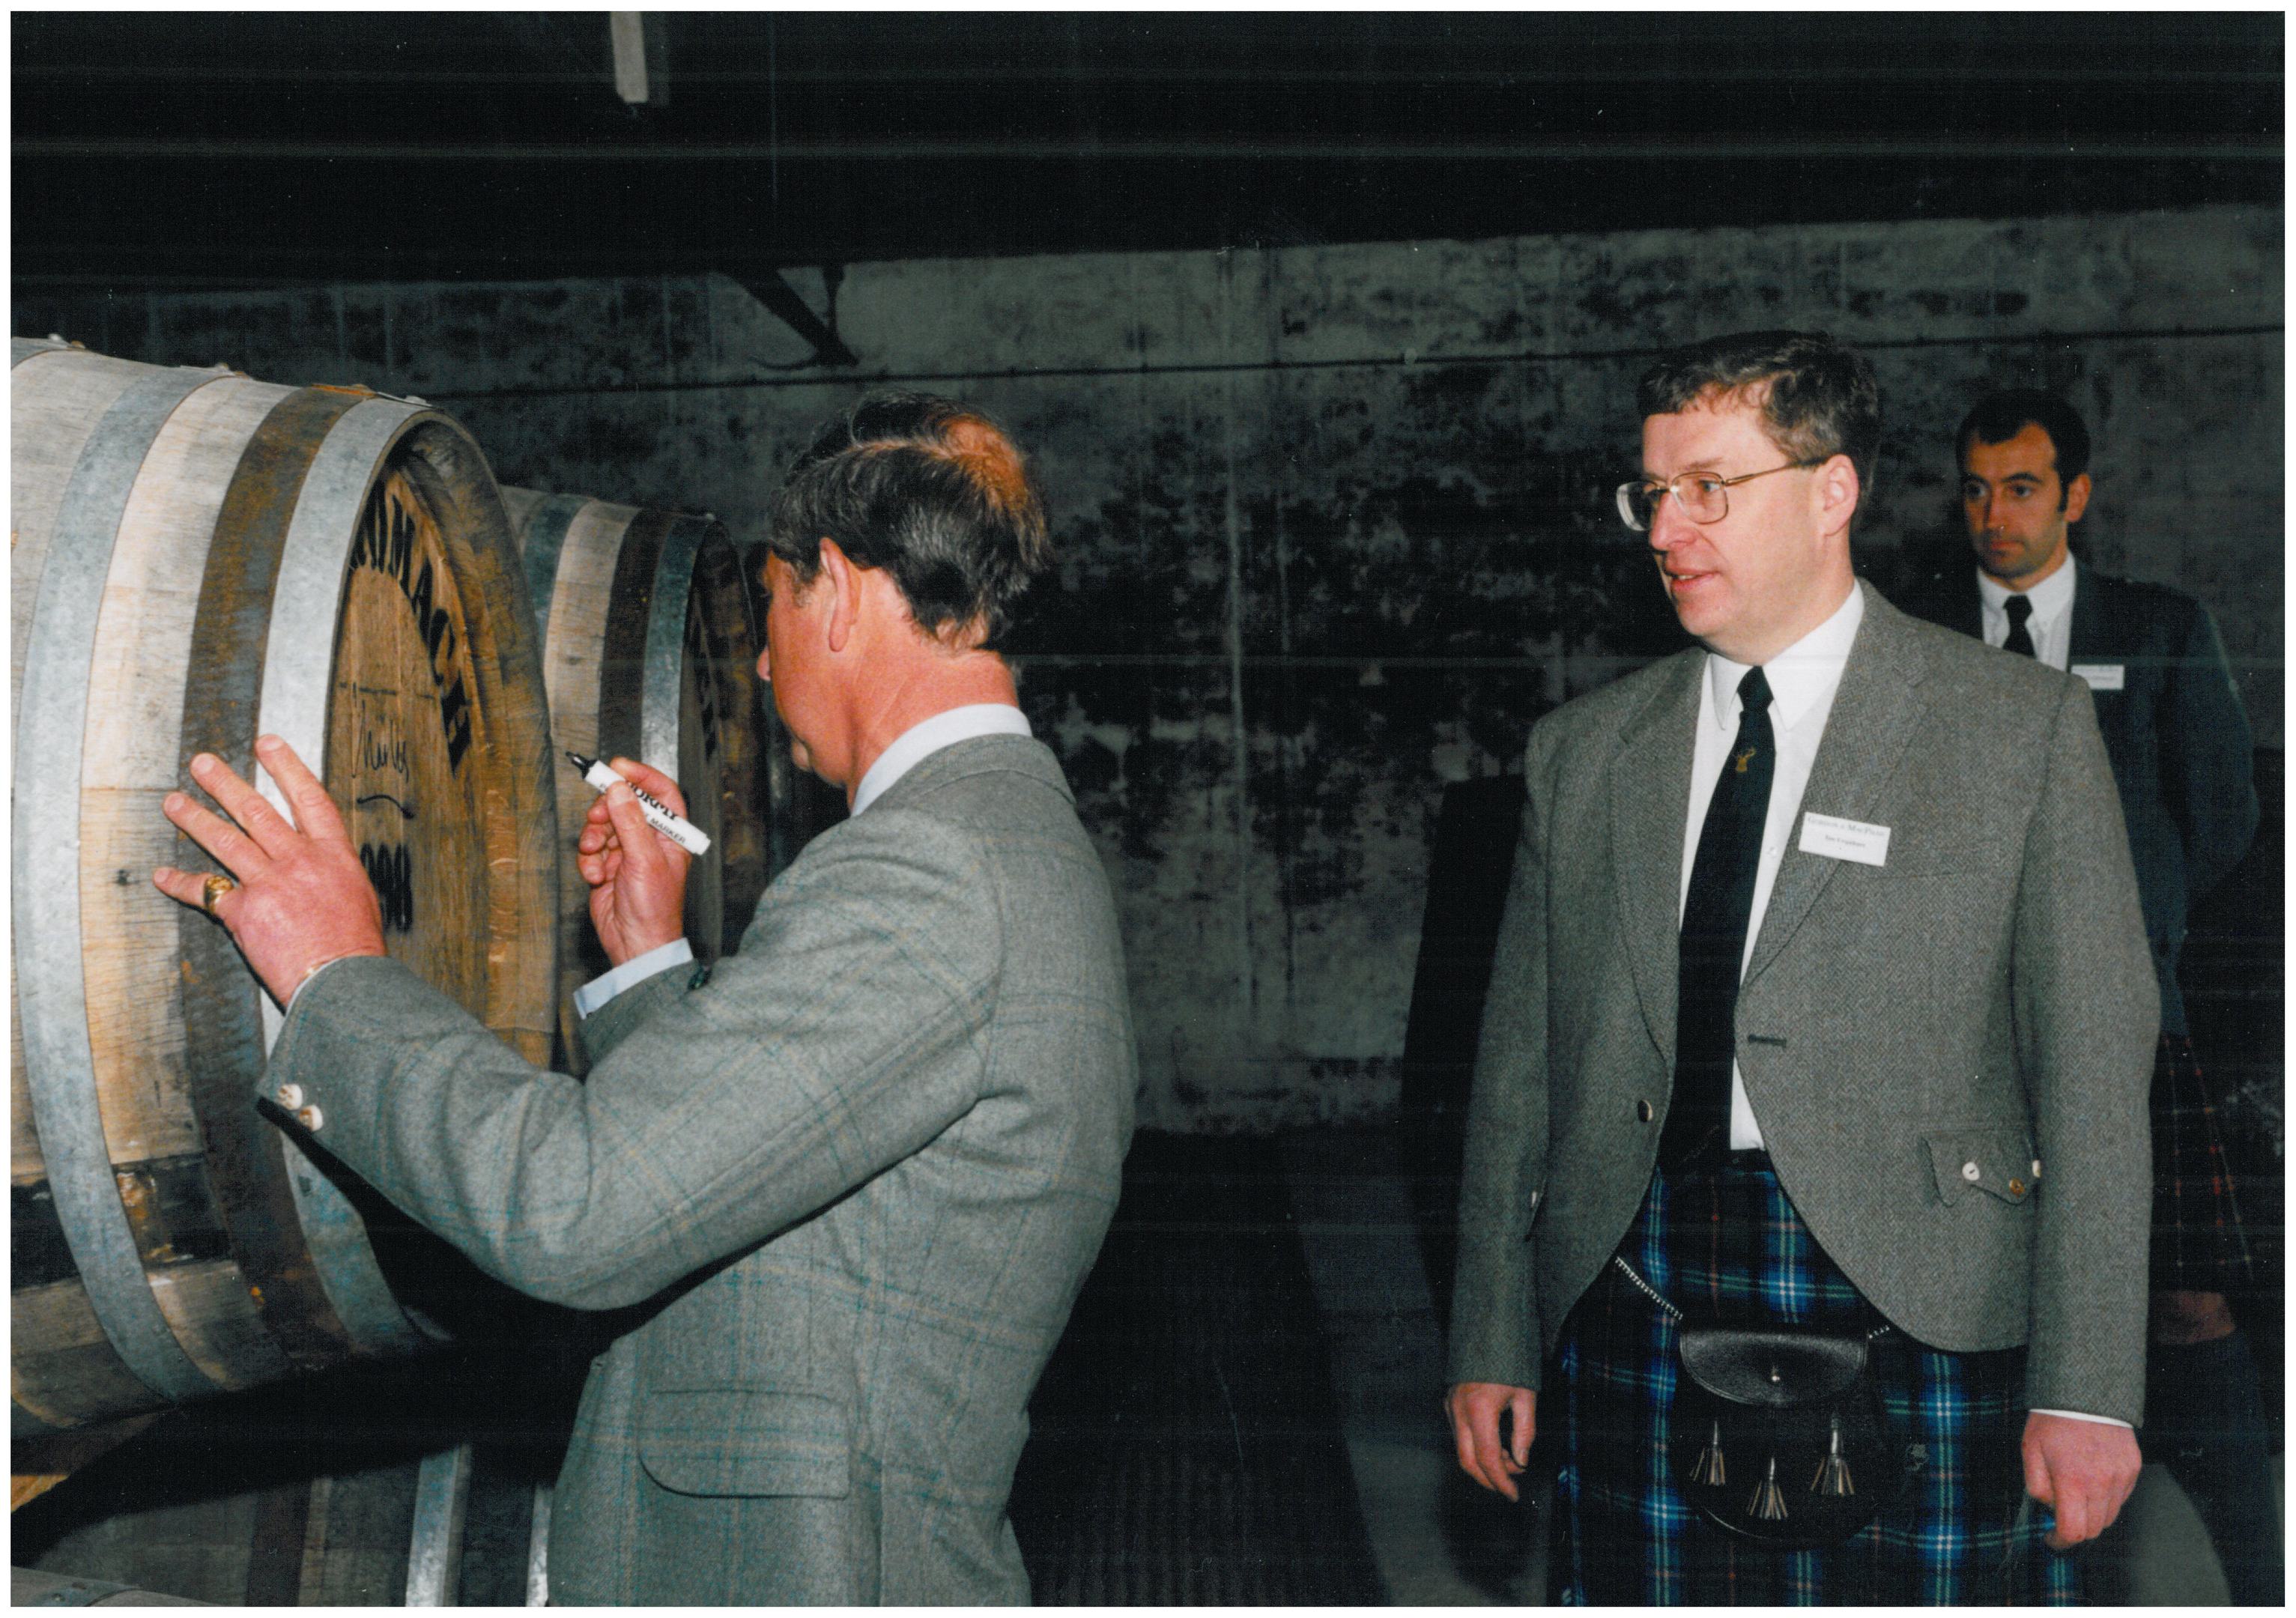 Prince Charles signing the first cask of Benromach whisky at the reopened distillery in 1998